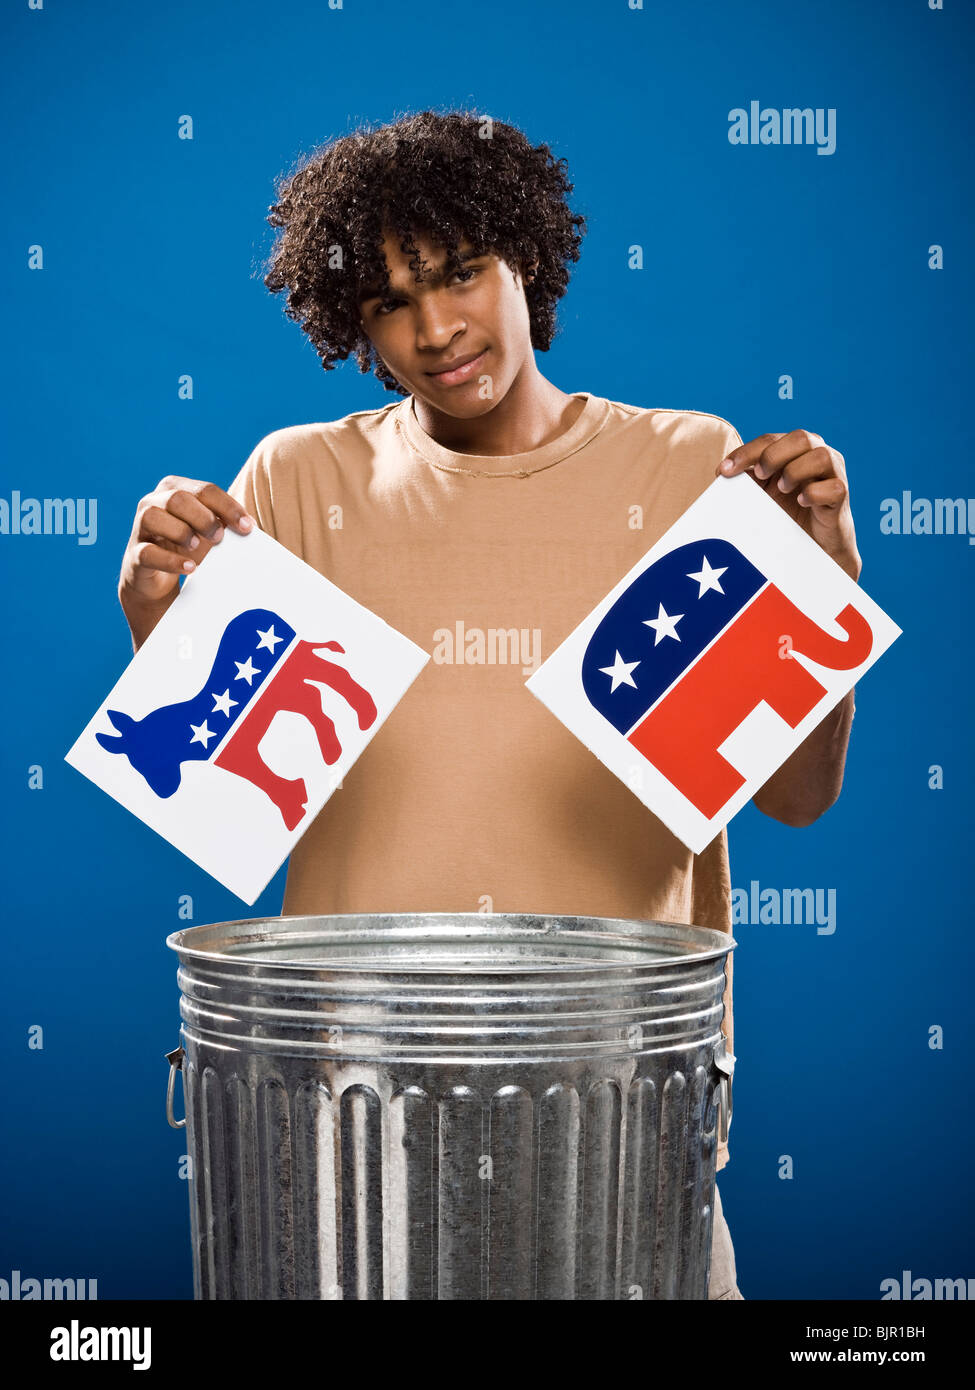 young man in a brown shirt throwing away a political party symbol. Stock Photo